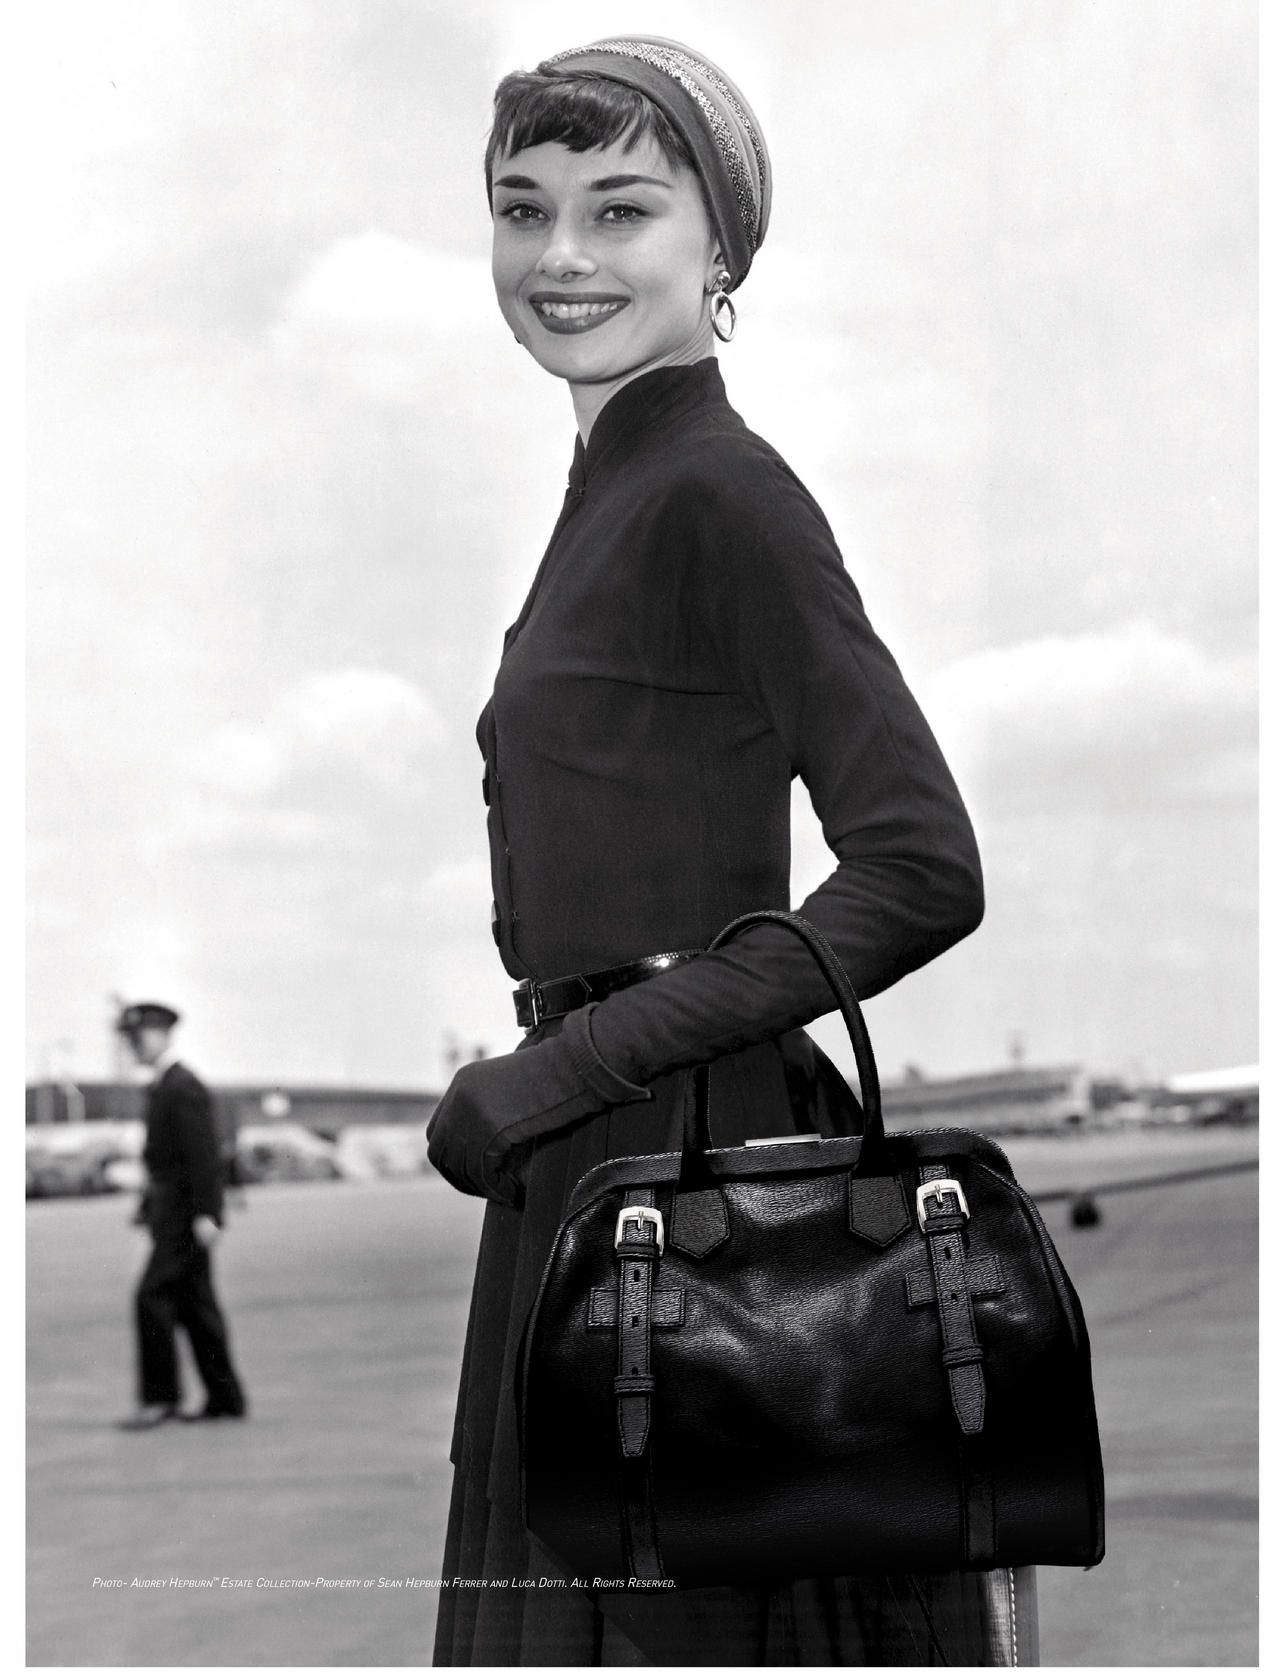 Celebrity appeal: Actress Audrey Hepburn (above) with a 1953 Riviera Bag for S.T. Dupont, and a page (below left) from an order book listing the firm's famous clients.